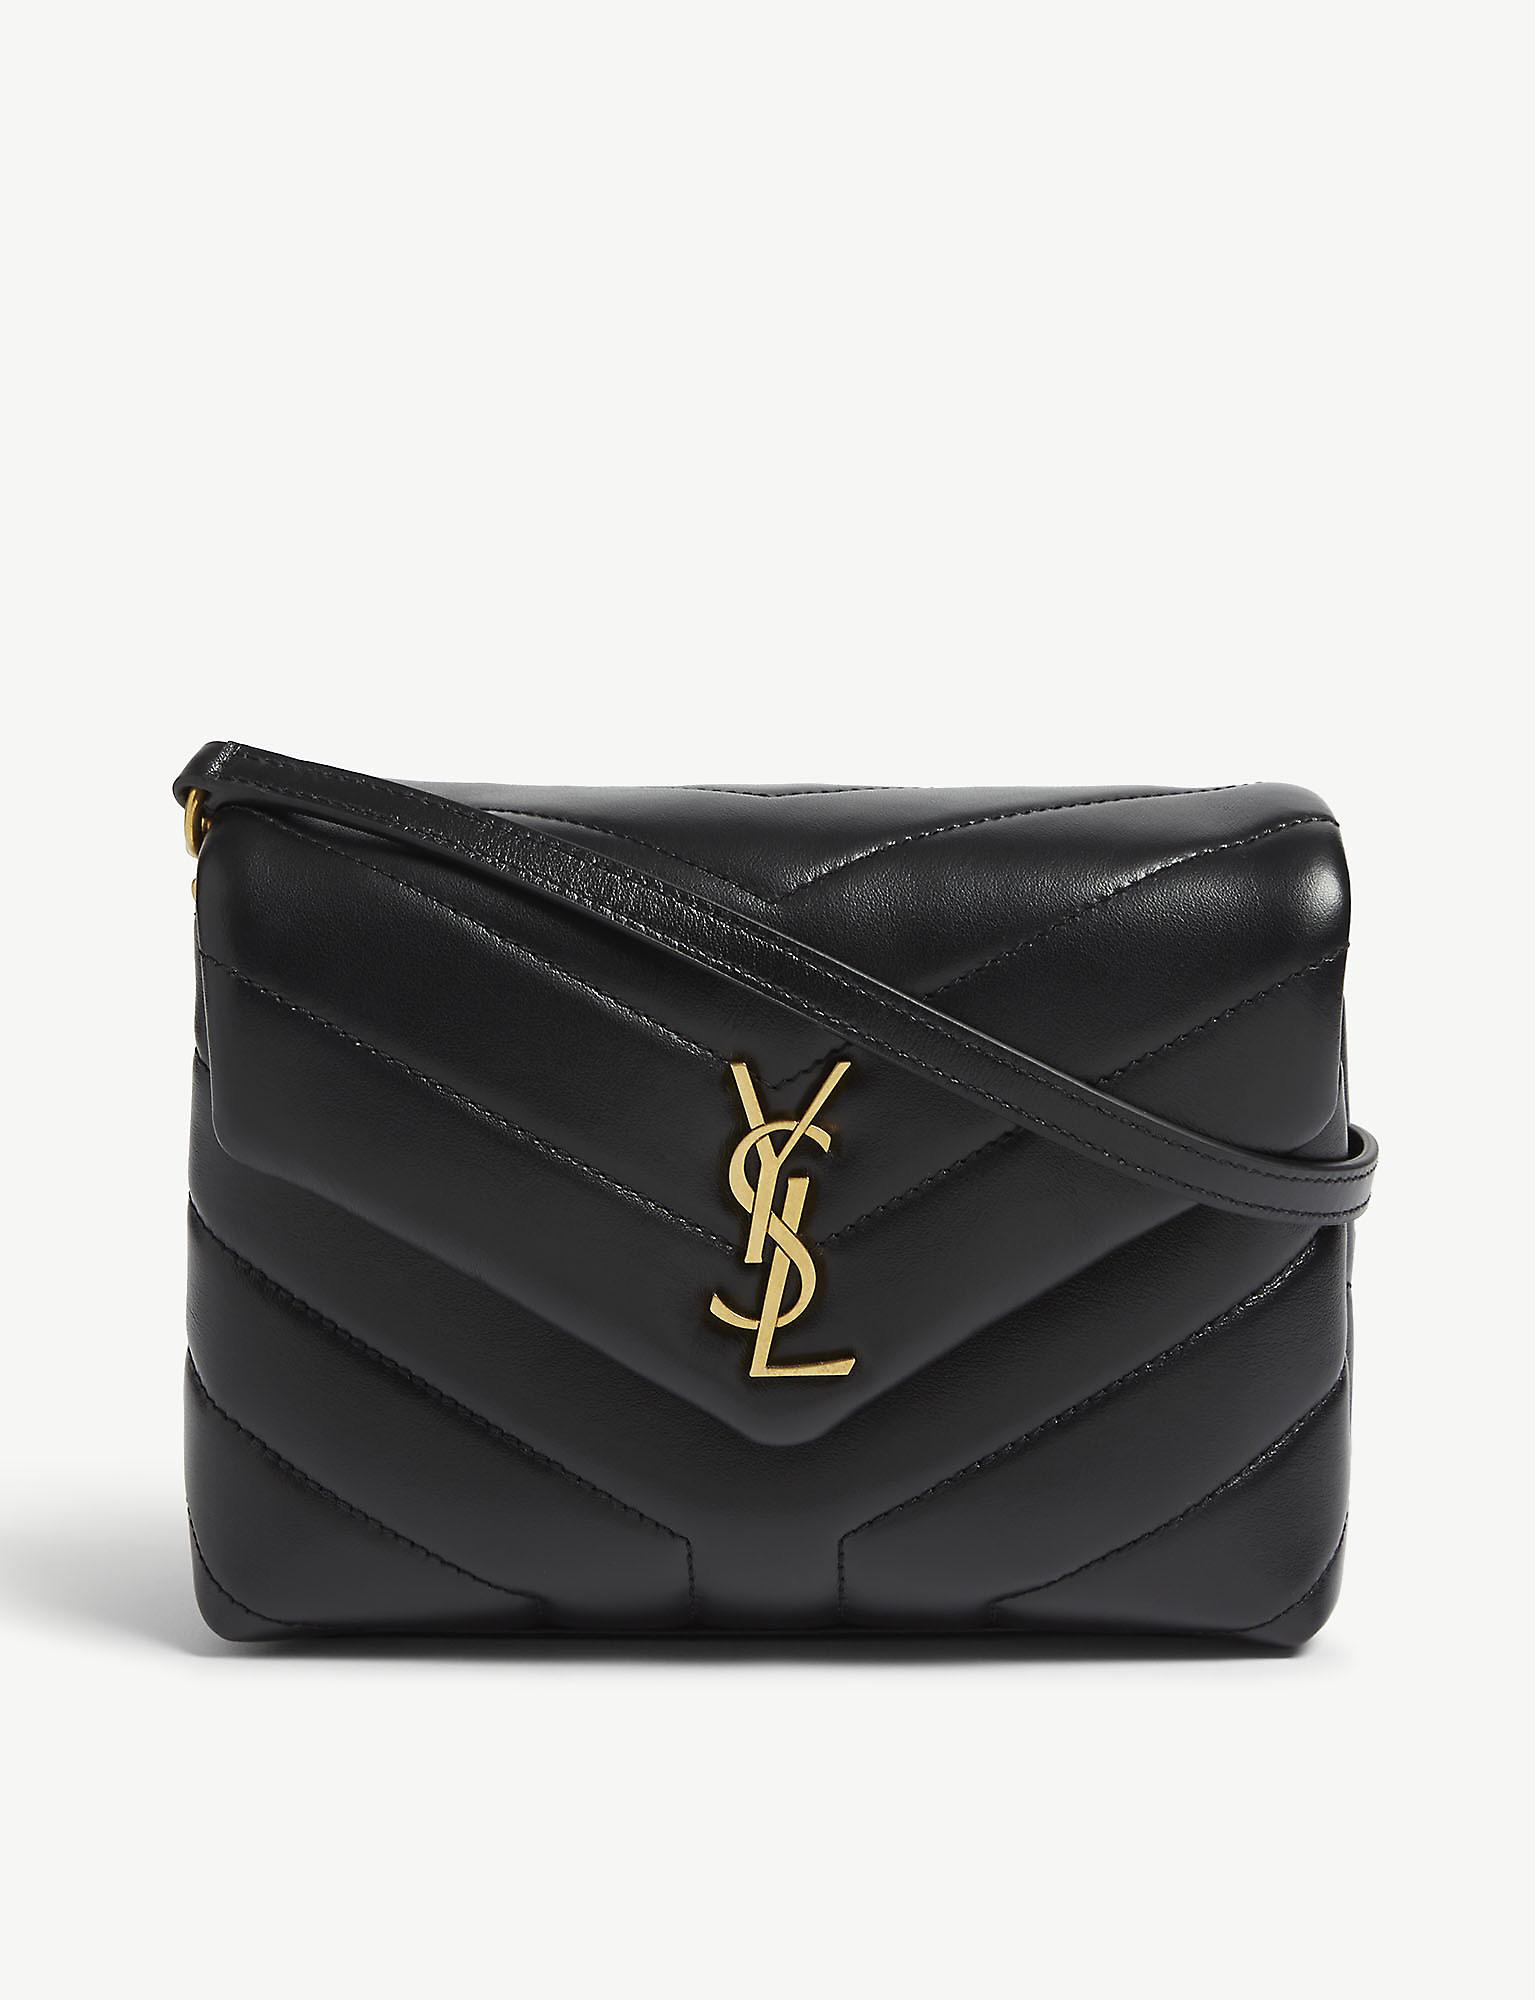 Saint Laurent Monogram Loulou Quilted Leather Cross-body Bag in Black - Lyst